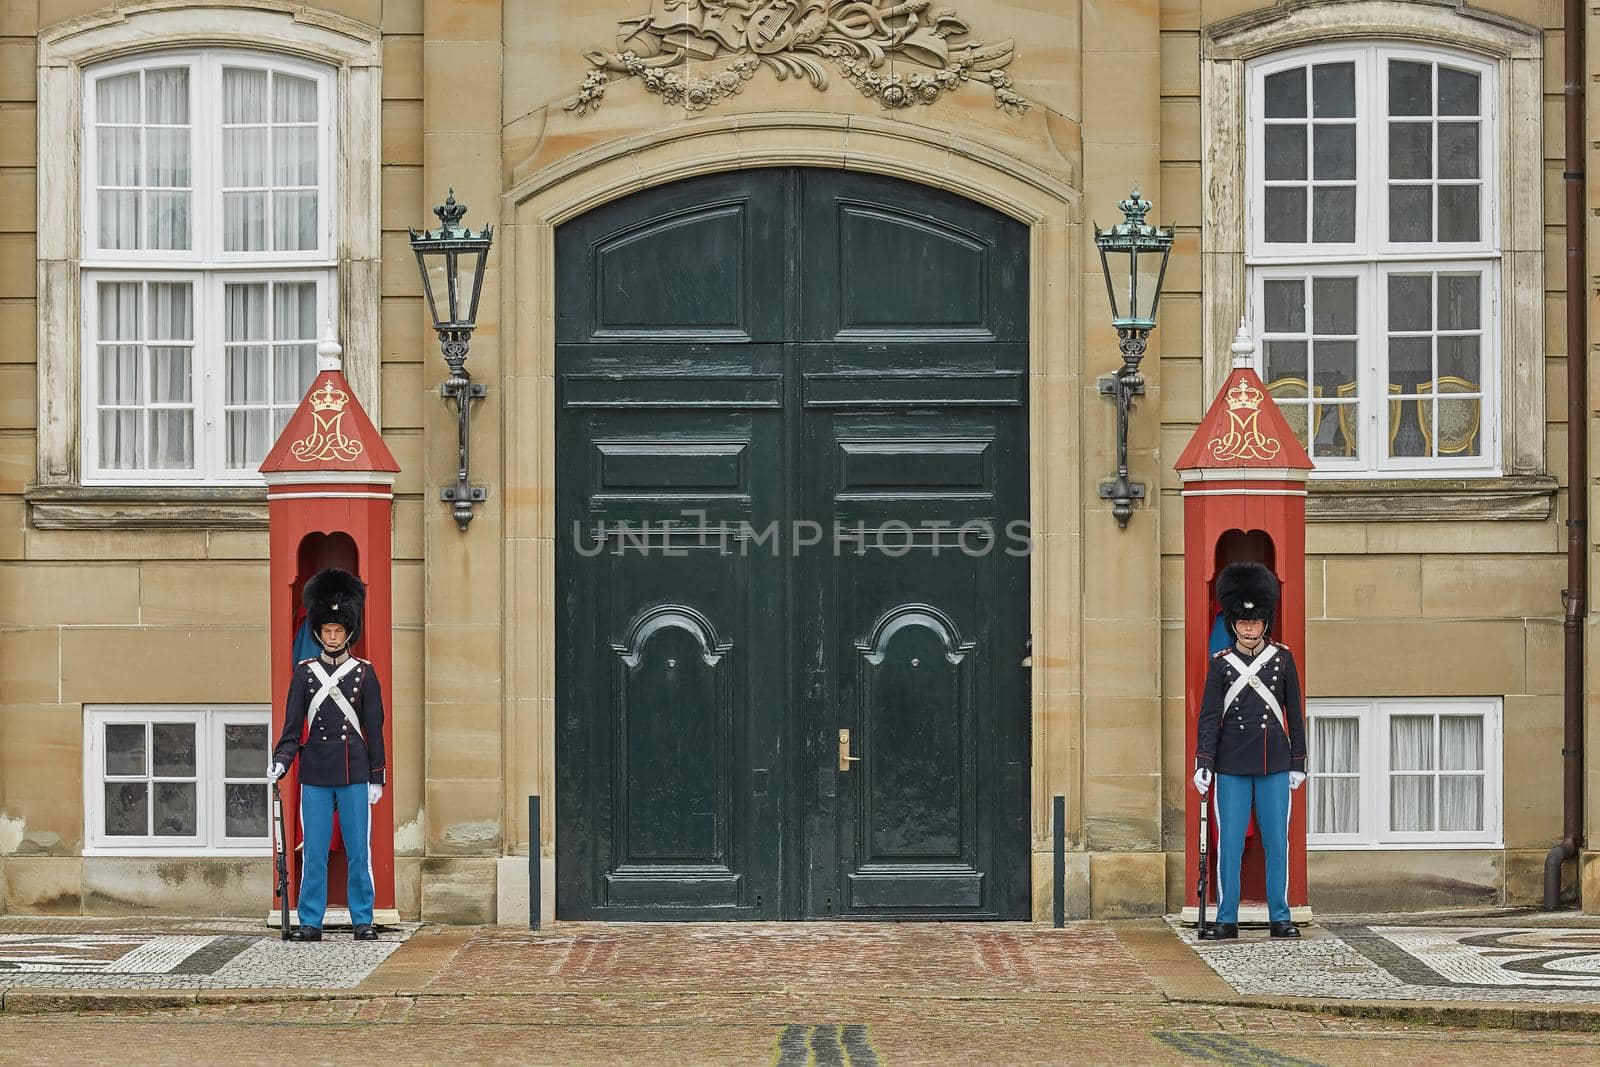 Military officers standing guard outside the Amalienborg Palace in Copenhagen, Denmark by wondry